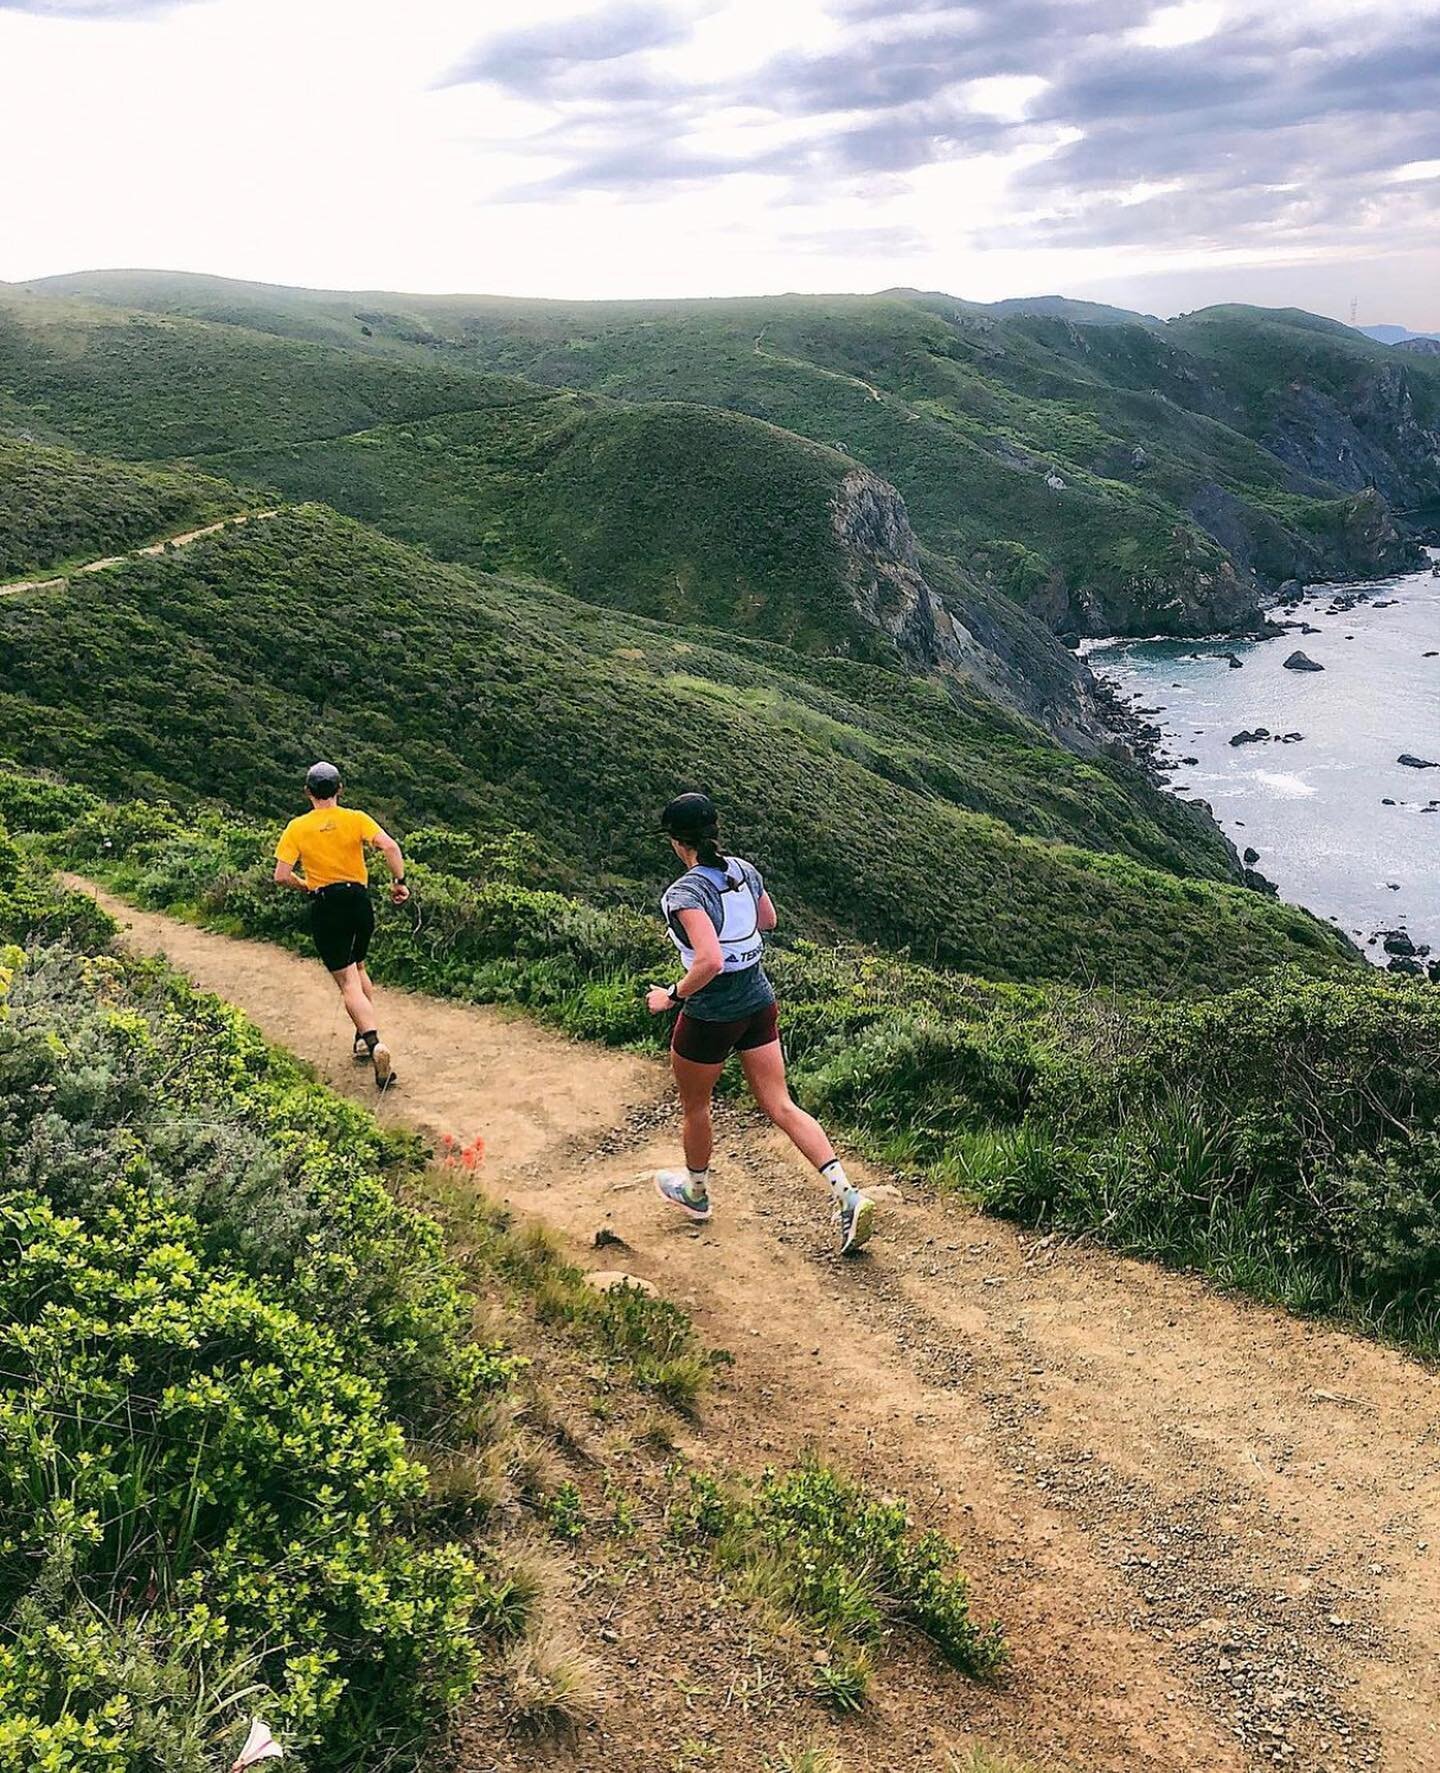 Run 4 tacos this weekend

Saturday Morning - we're partnering up with our friends from across the street at San Francisco Running Company for their weekly Saturday run. You can join their group for a morning run and finish at the Junction for breakfa